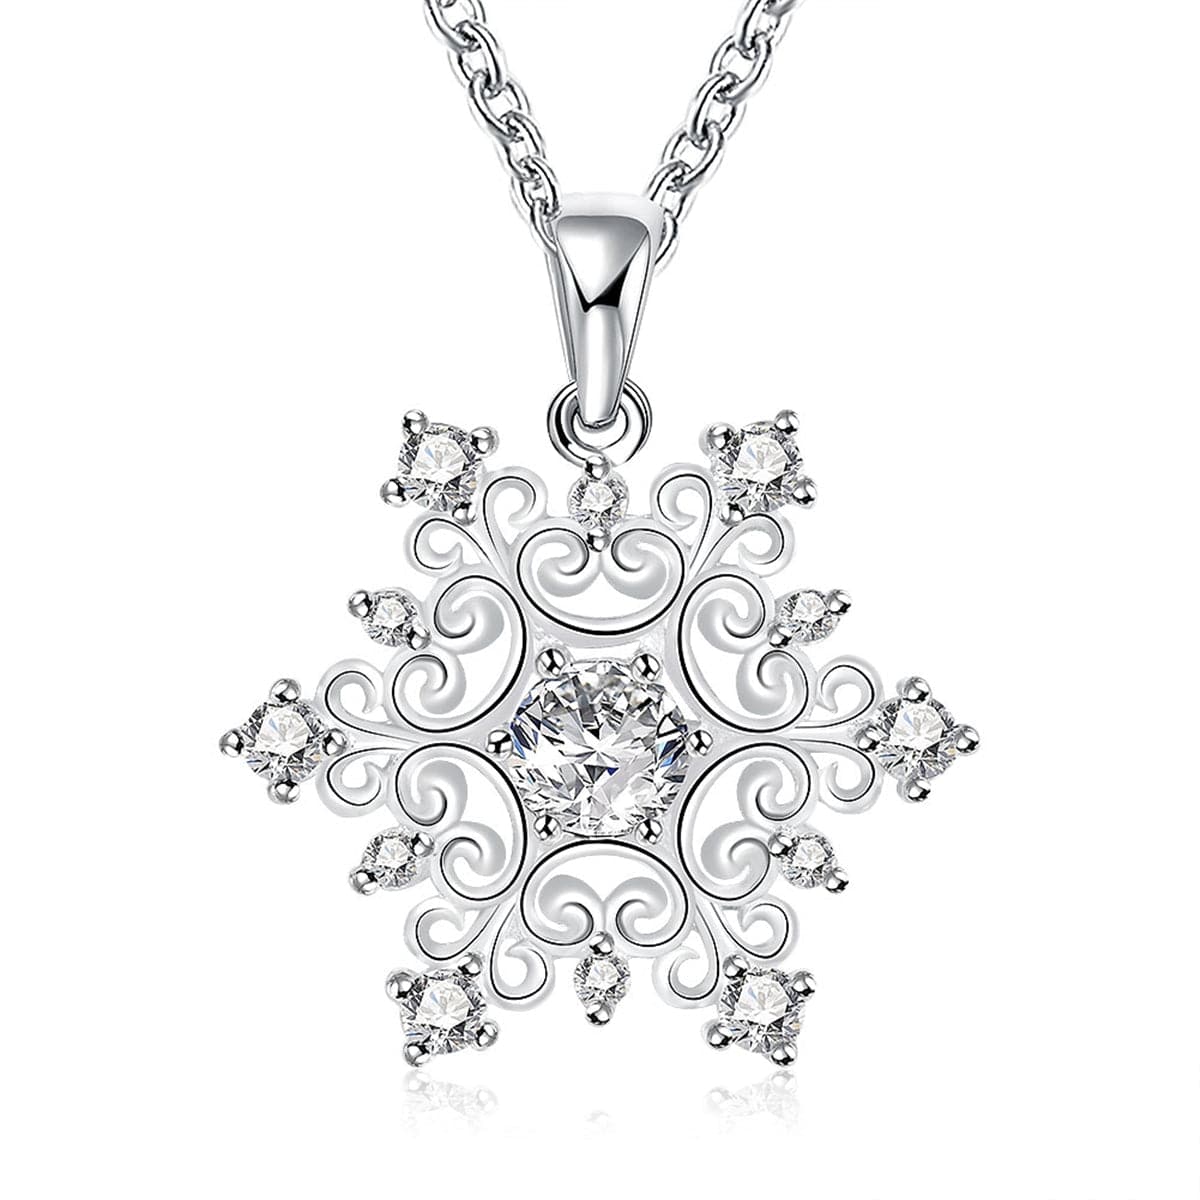 White Cubic Zirconia & Silver-Plated Snowflake Pendant Necklace - streetregion